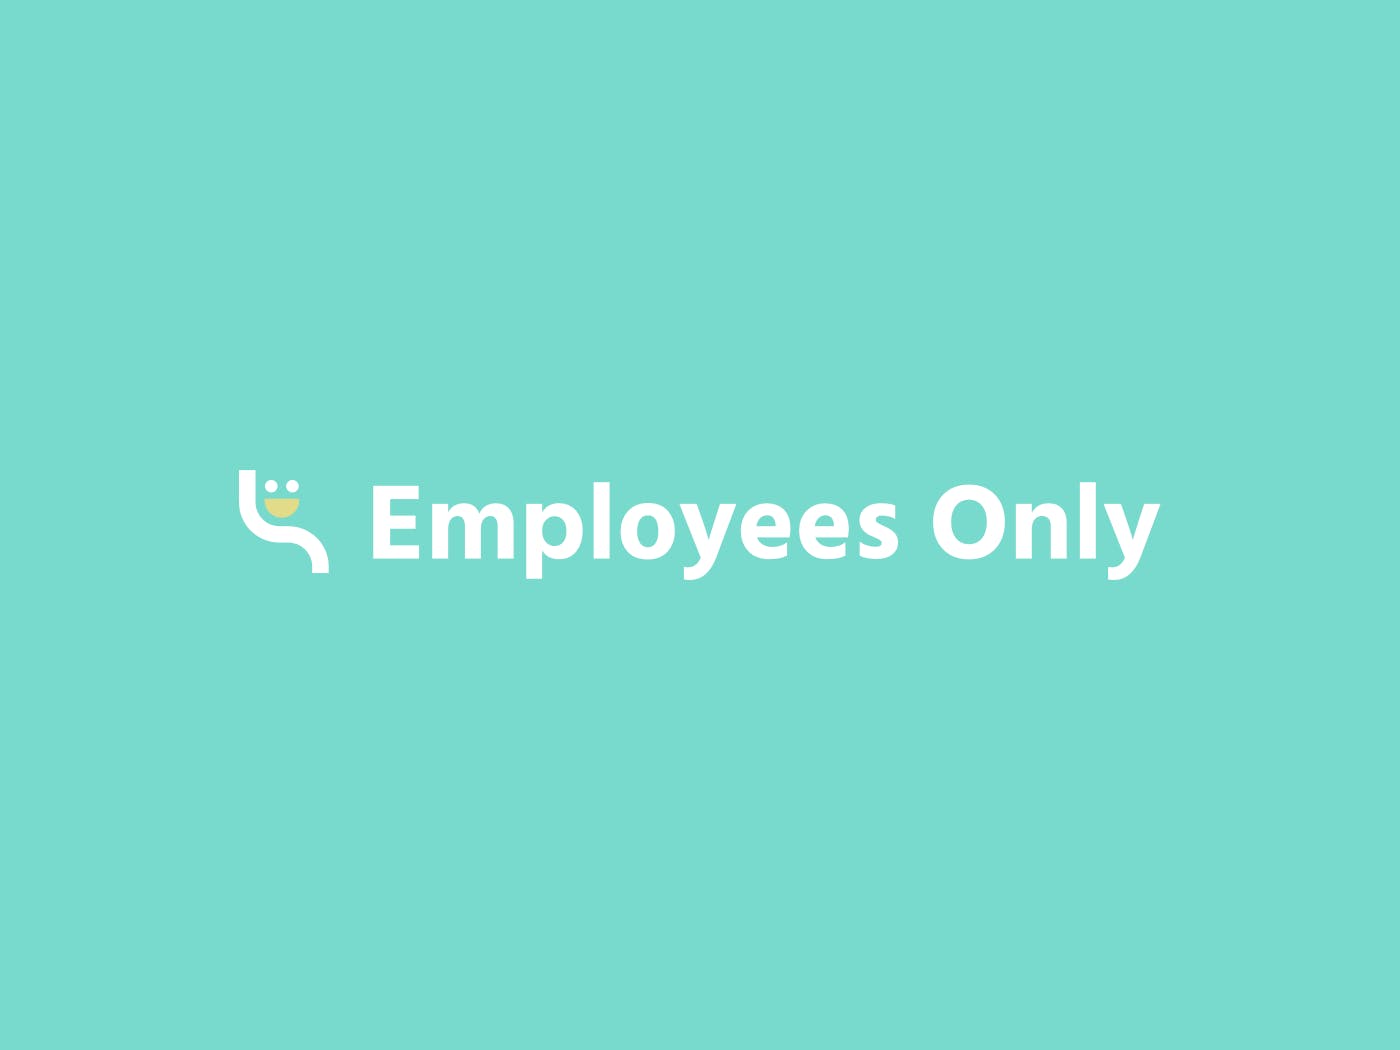 Employees Only media 1